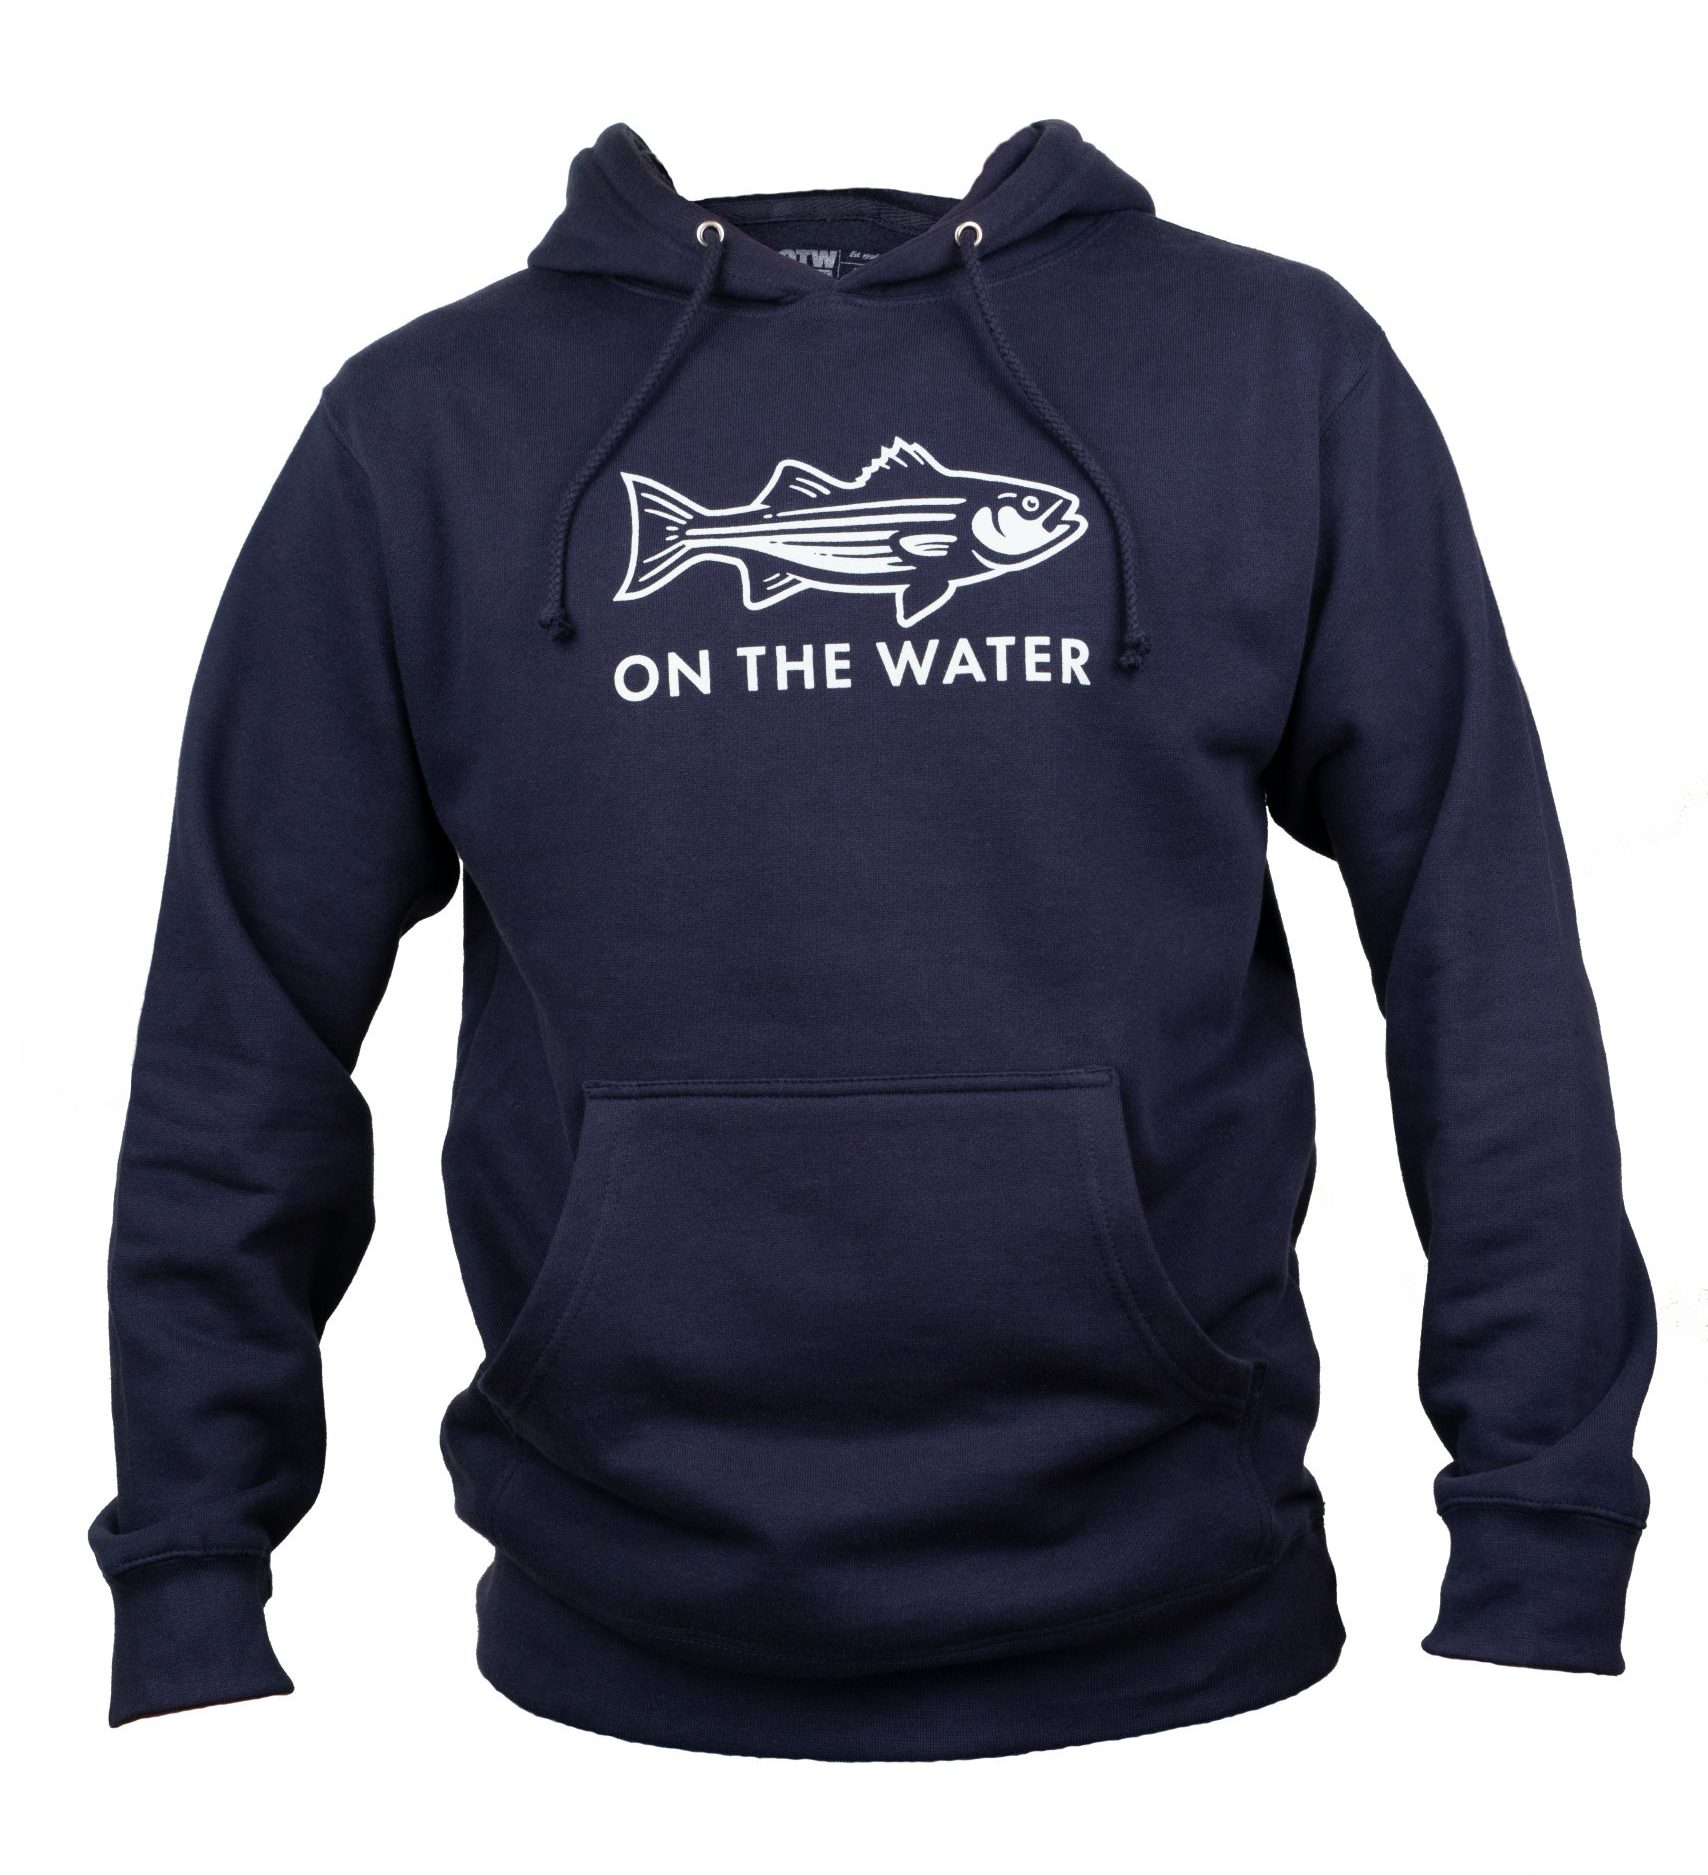 Fathers Day Gift for the Man Who Loves to Fish